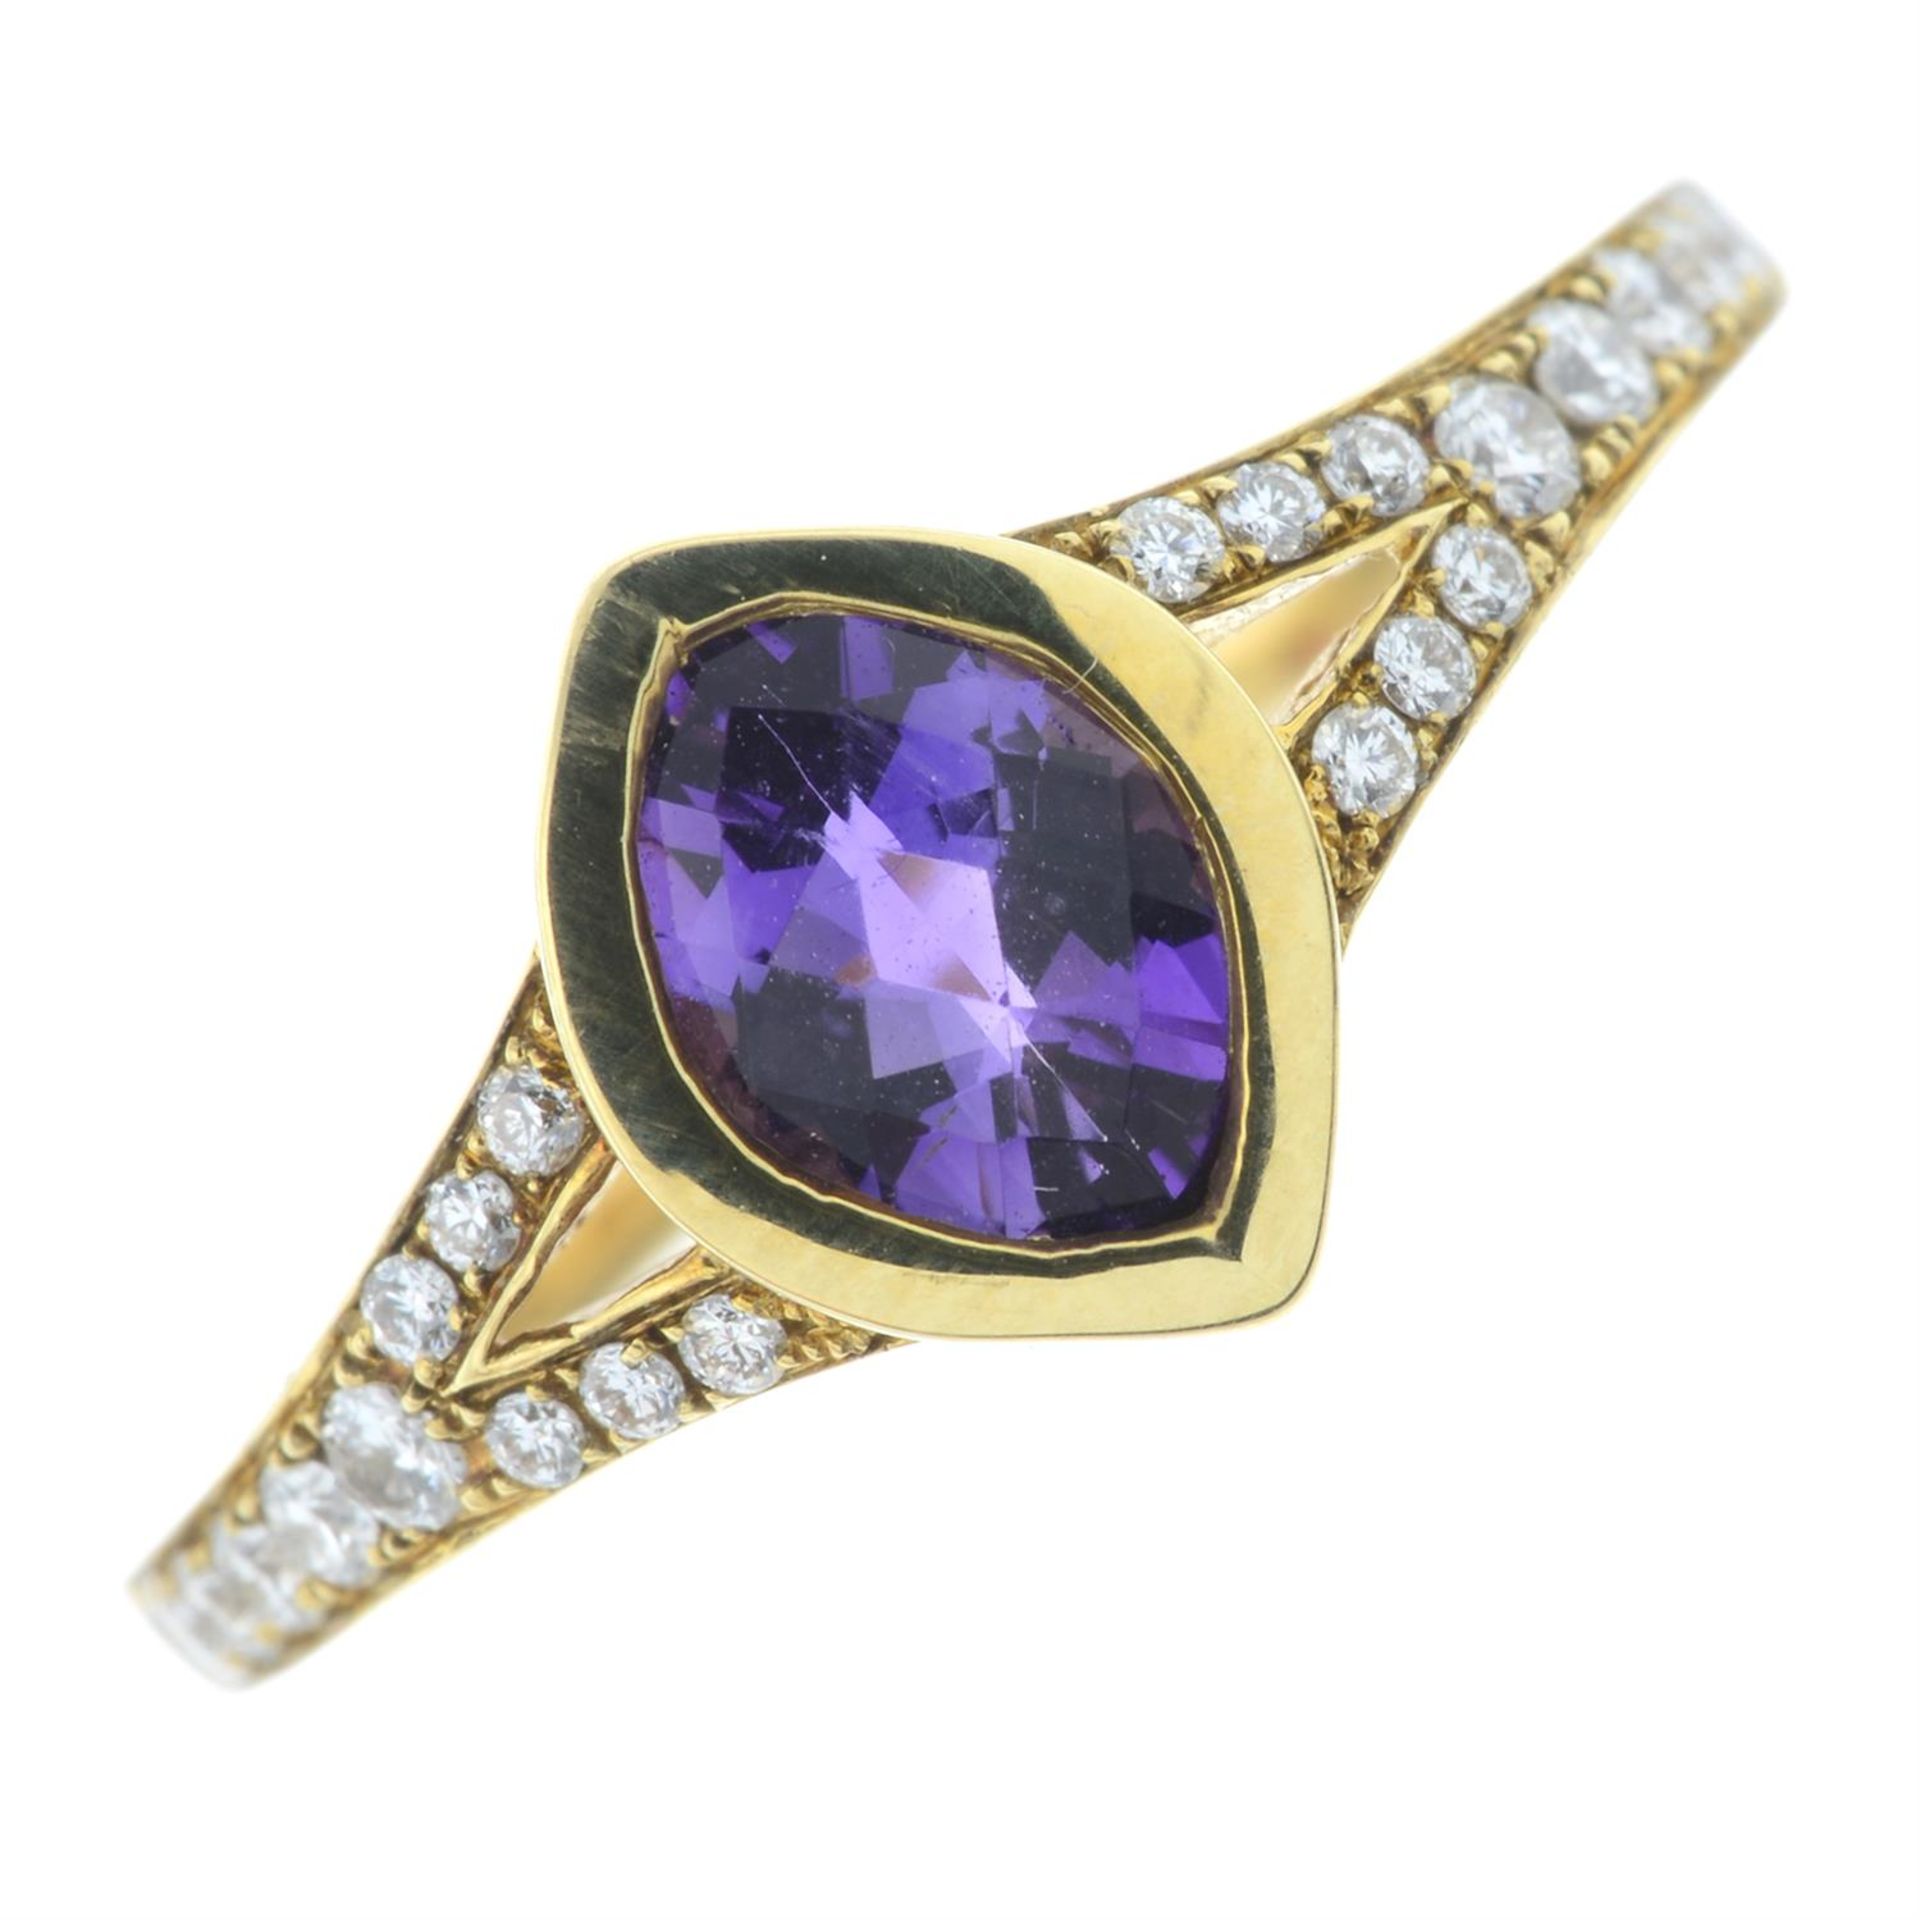 An 18ct gold amethyst dress ring, with diamond sides.